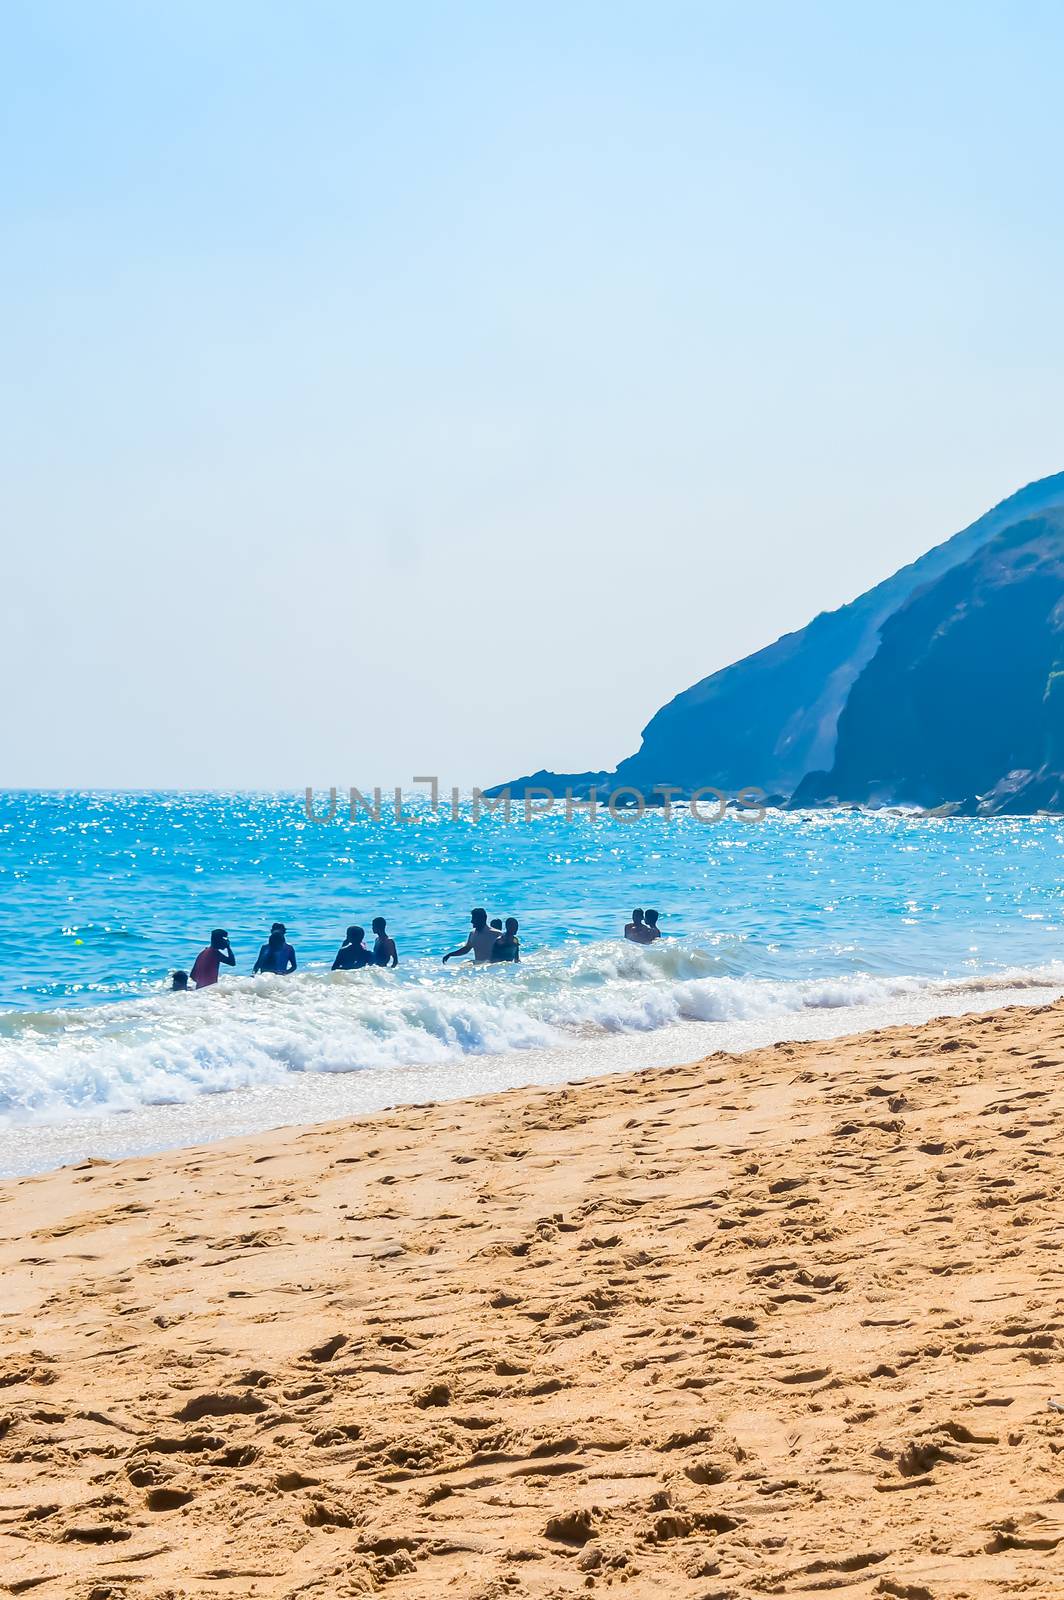 Goa Sea Beach view in clear bright sunny day from a far distance during daytime in clear blue sky by sudiptabhowmick